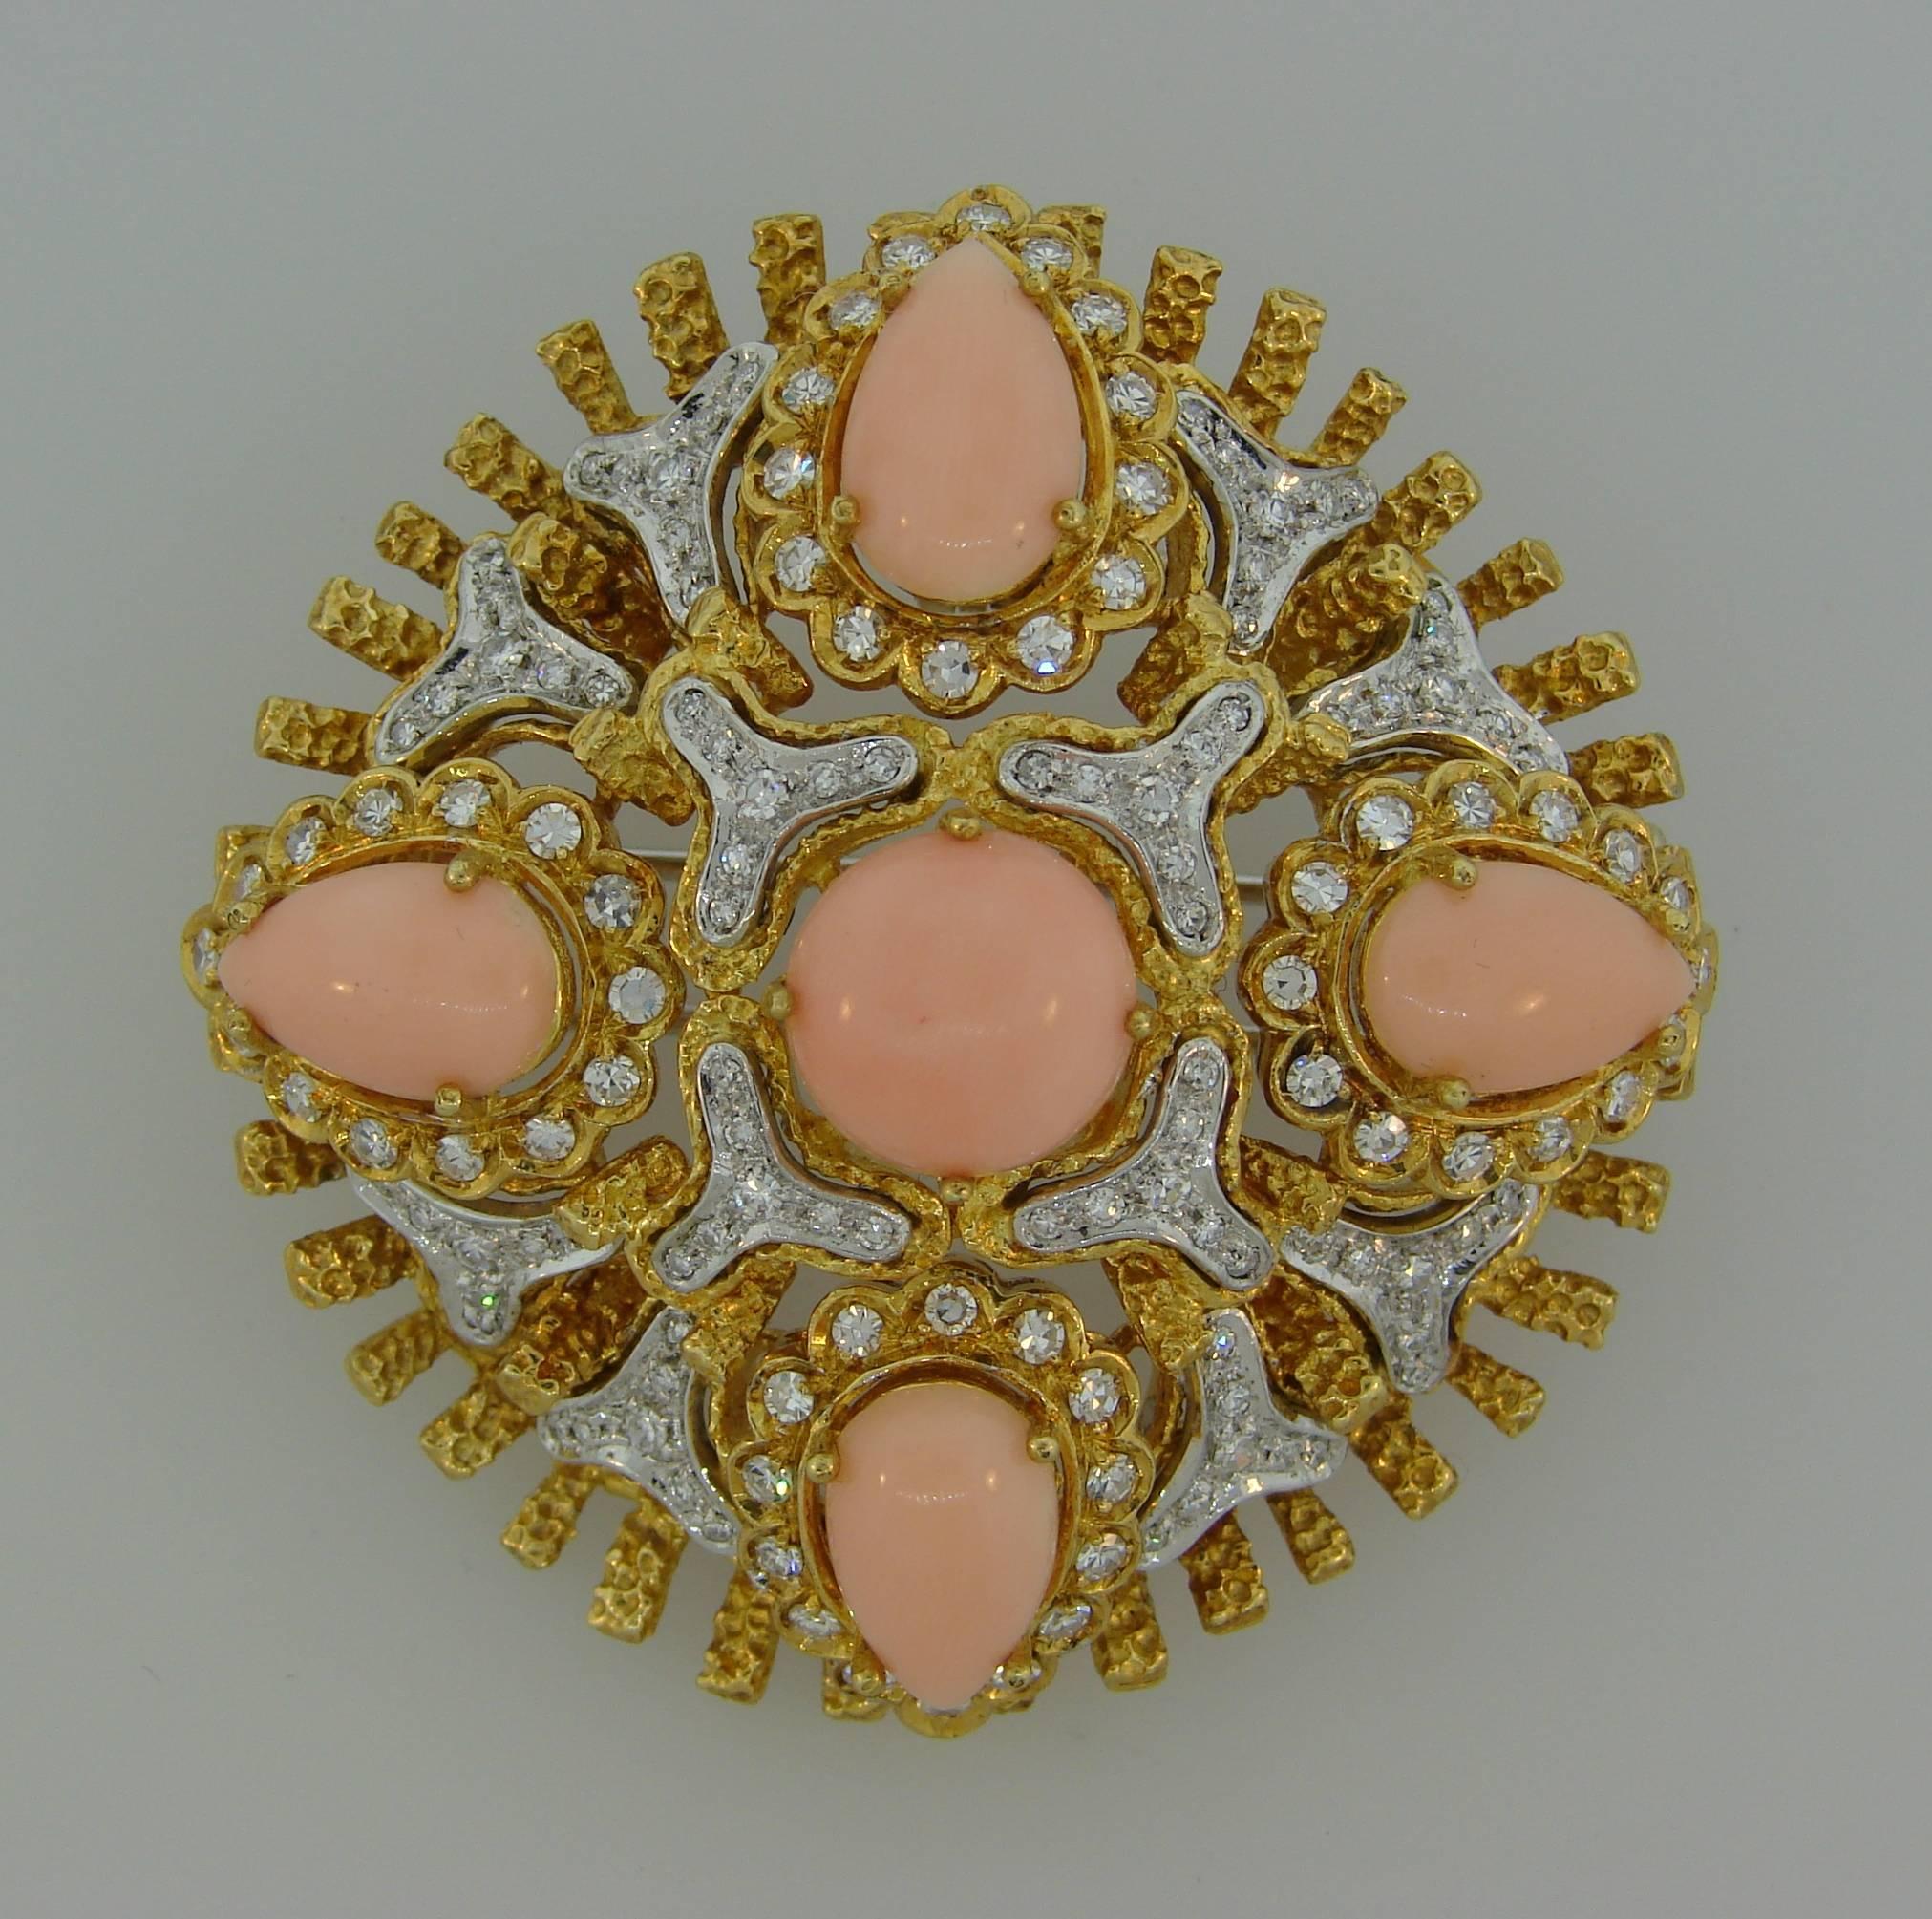 Elegant three-dimensional brooch/pendant that is a great addition to your jewelry collection. Versatile and wearable piece of jewelry - you can wear it as a pin on your dress or scarf, or you can put it on a chain or a necklace and wear it as a